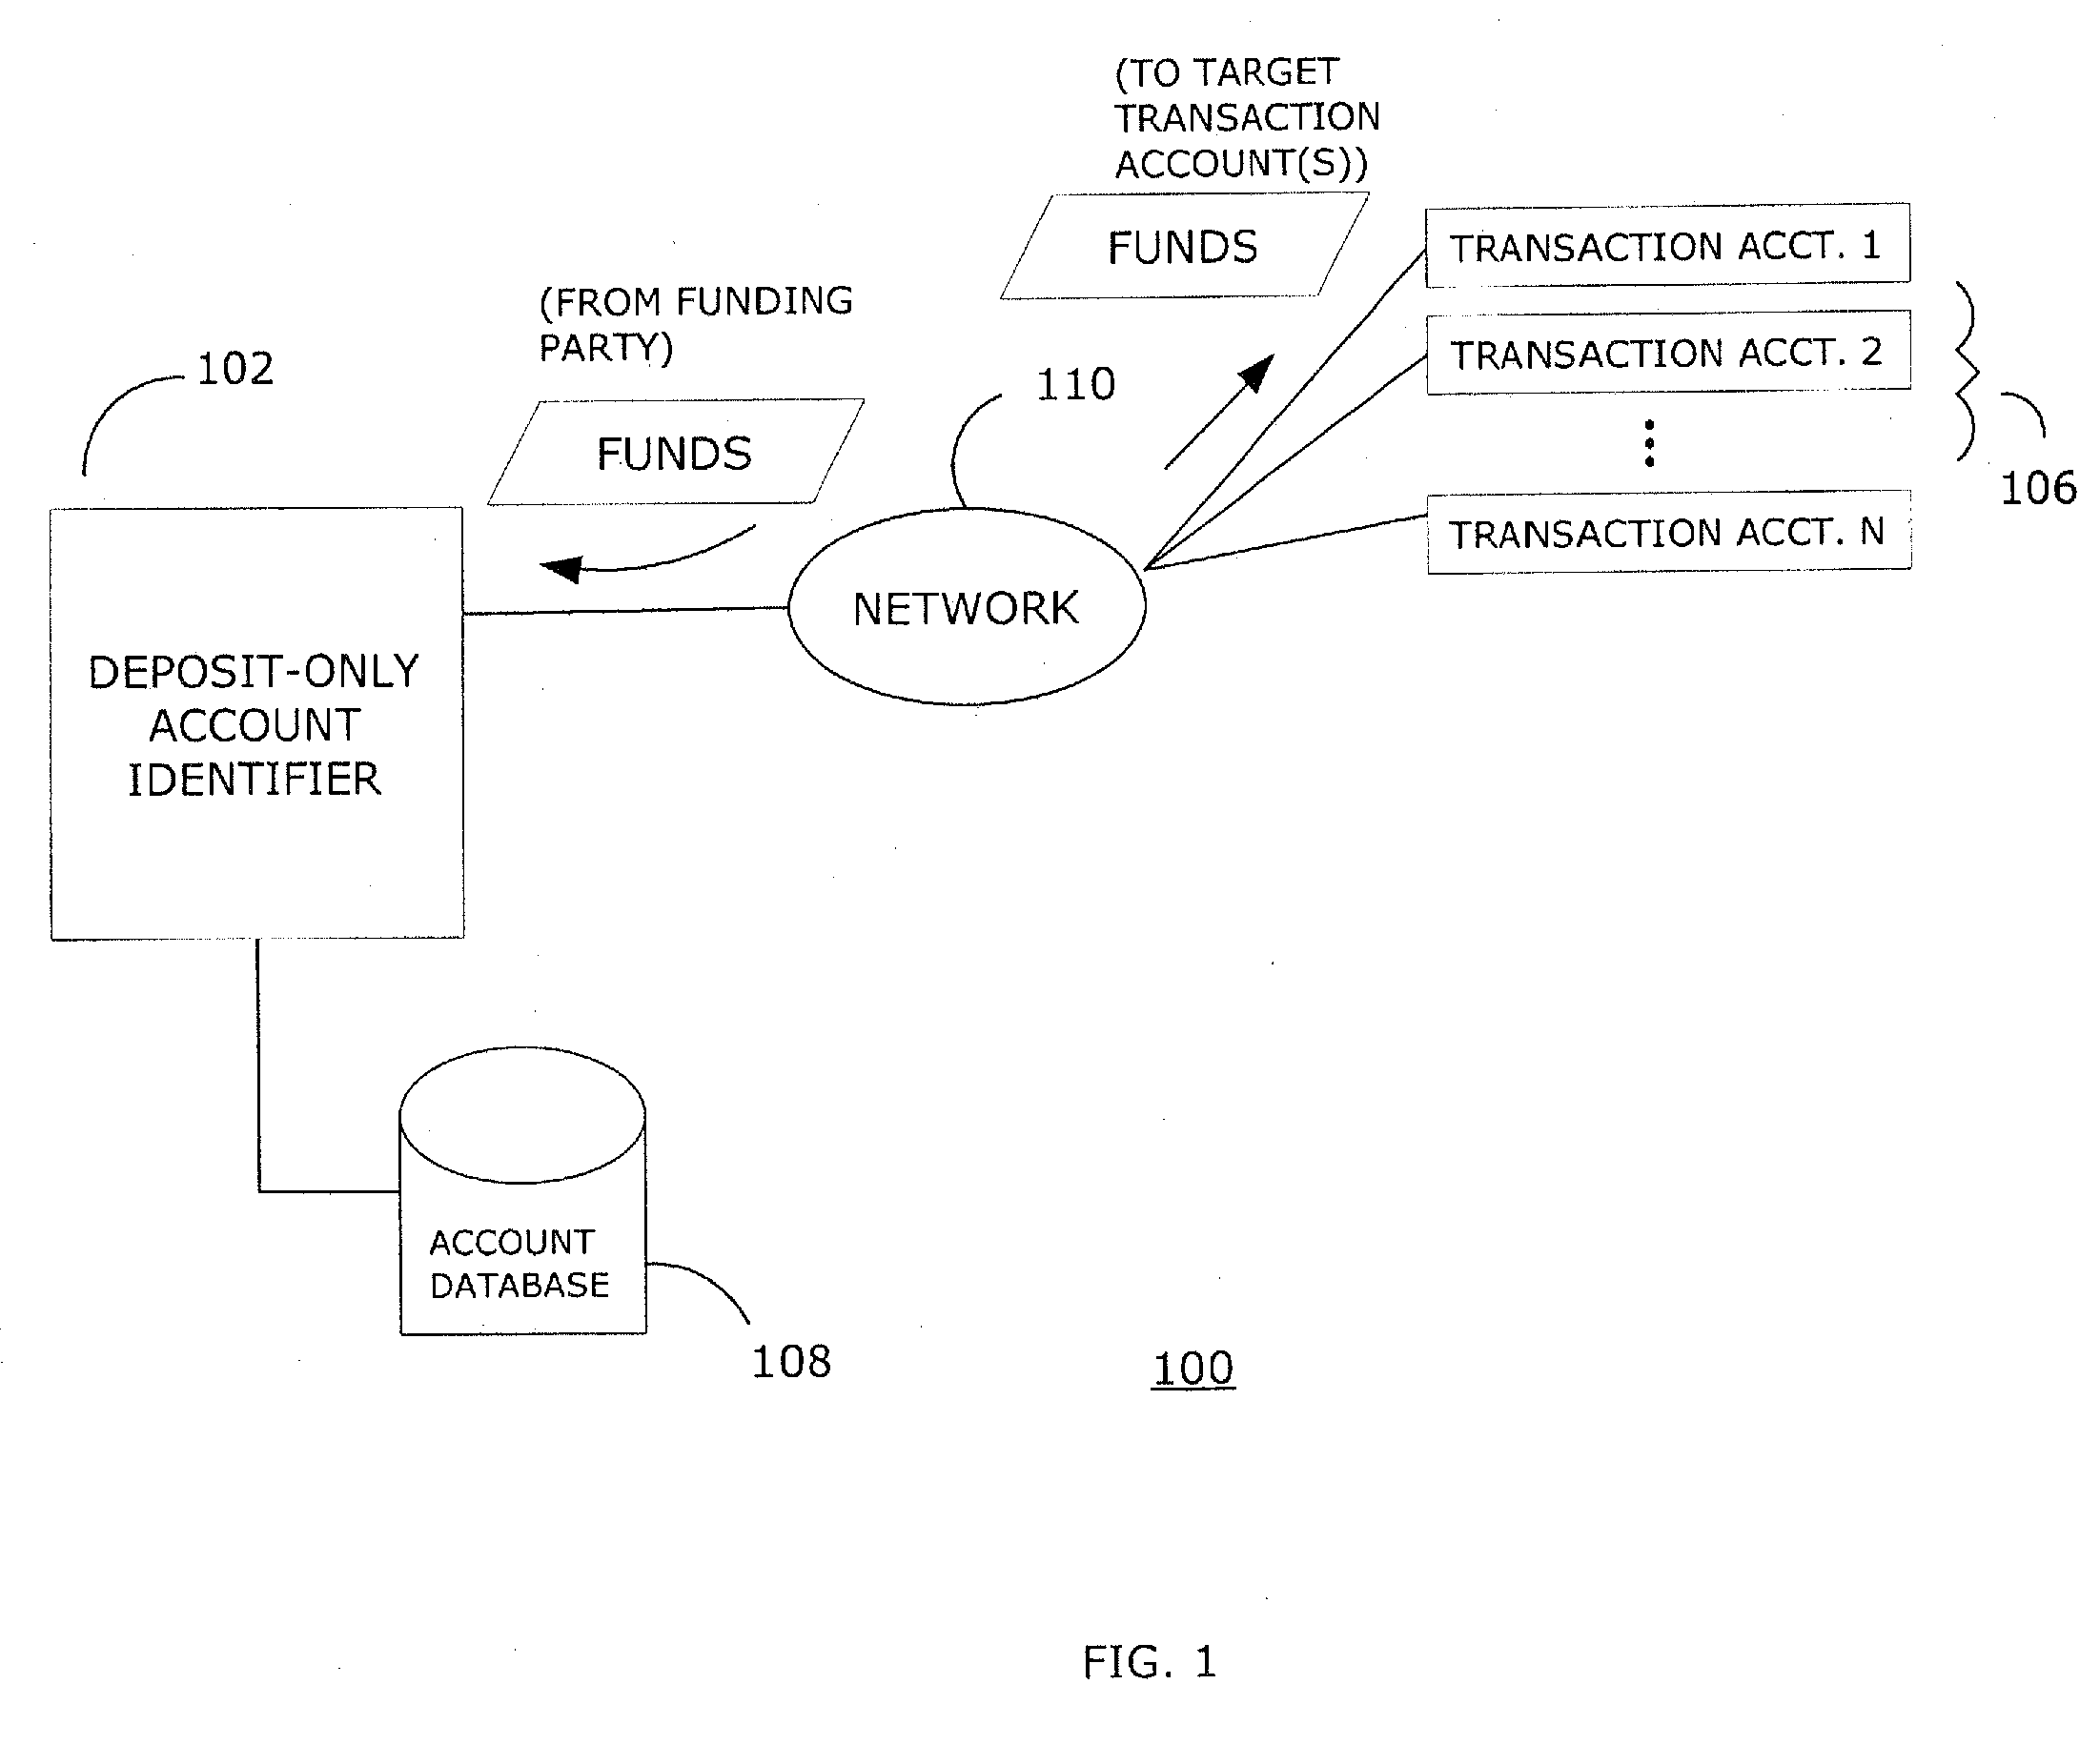 Systems and methods for generating and managing a linked deposit-only account identifier